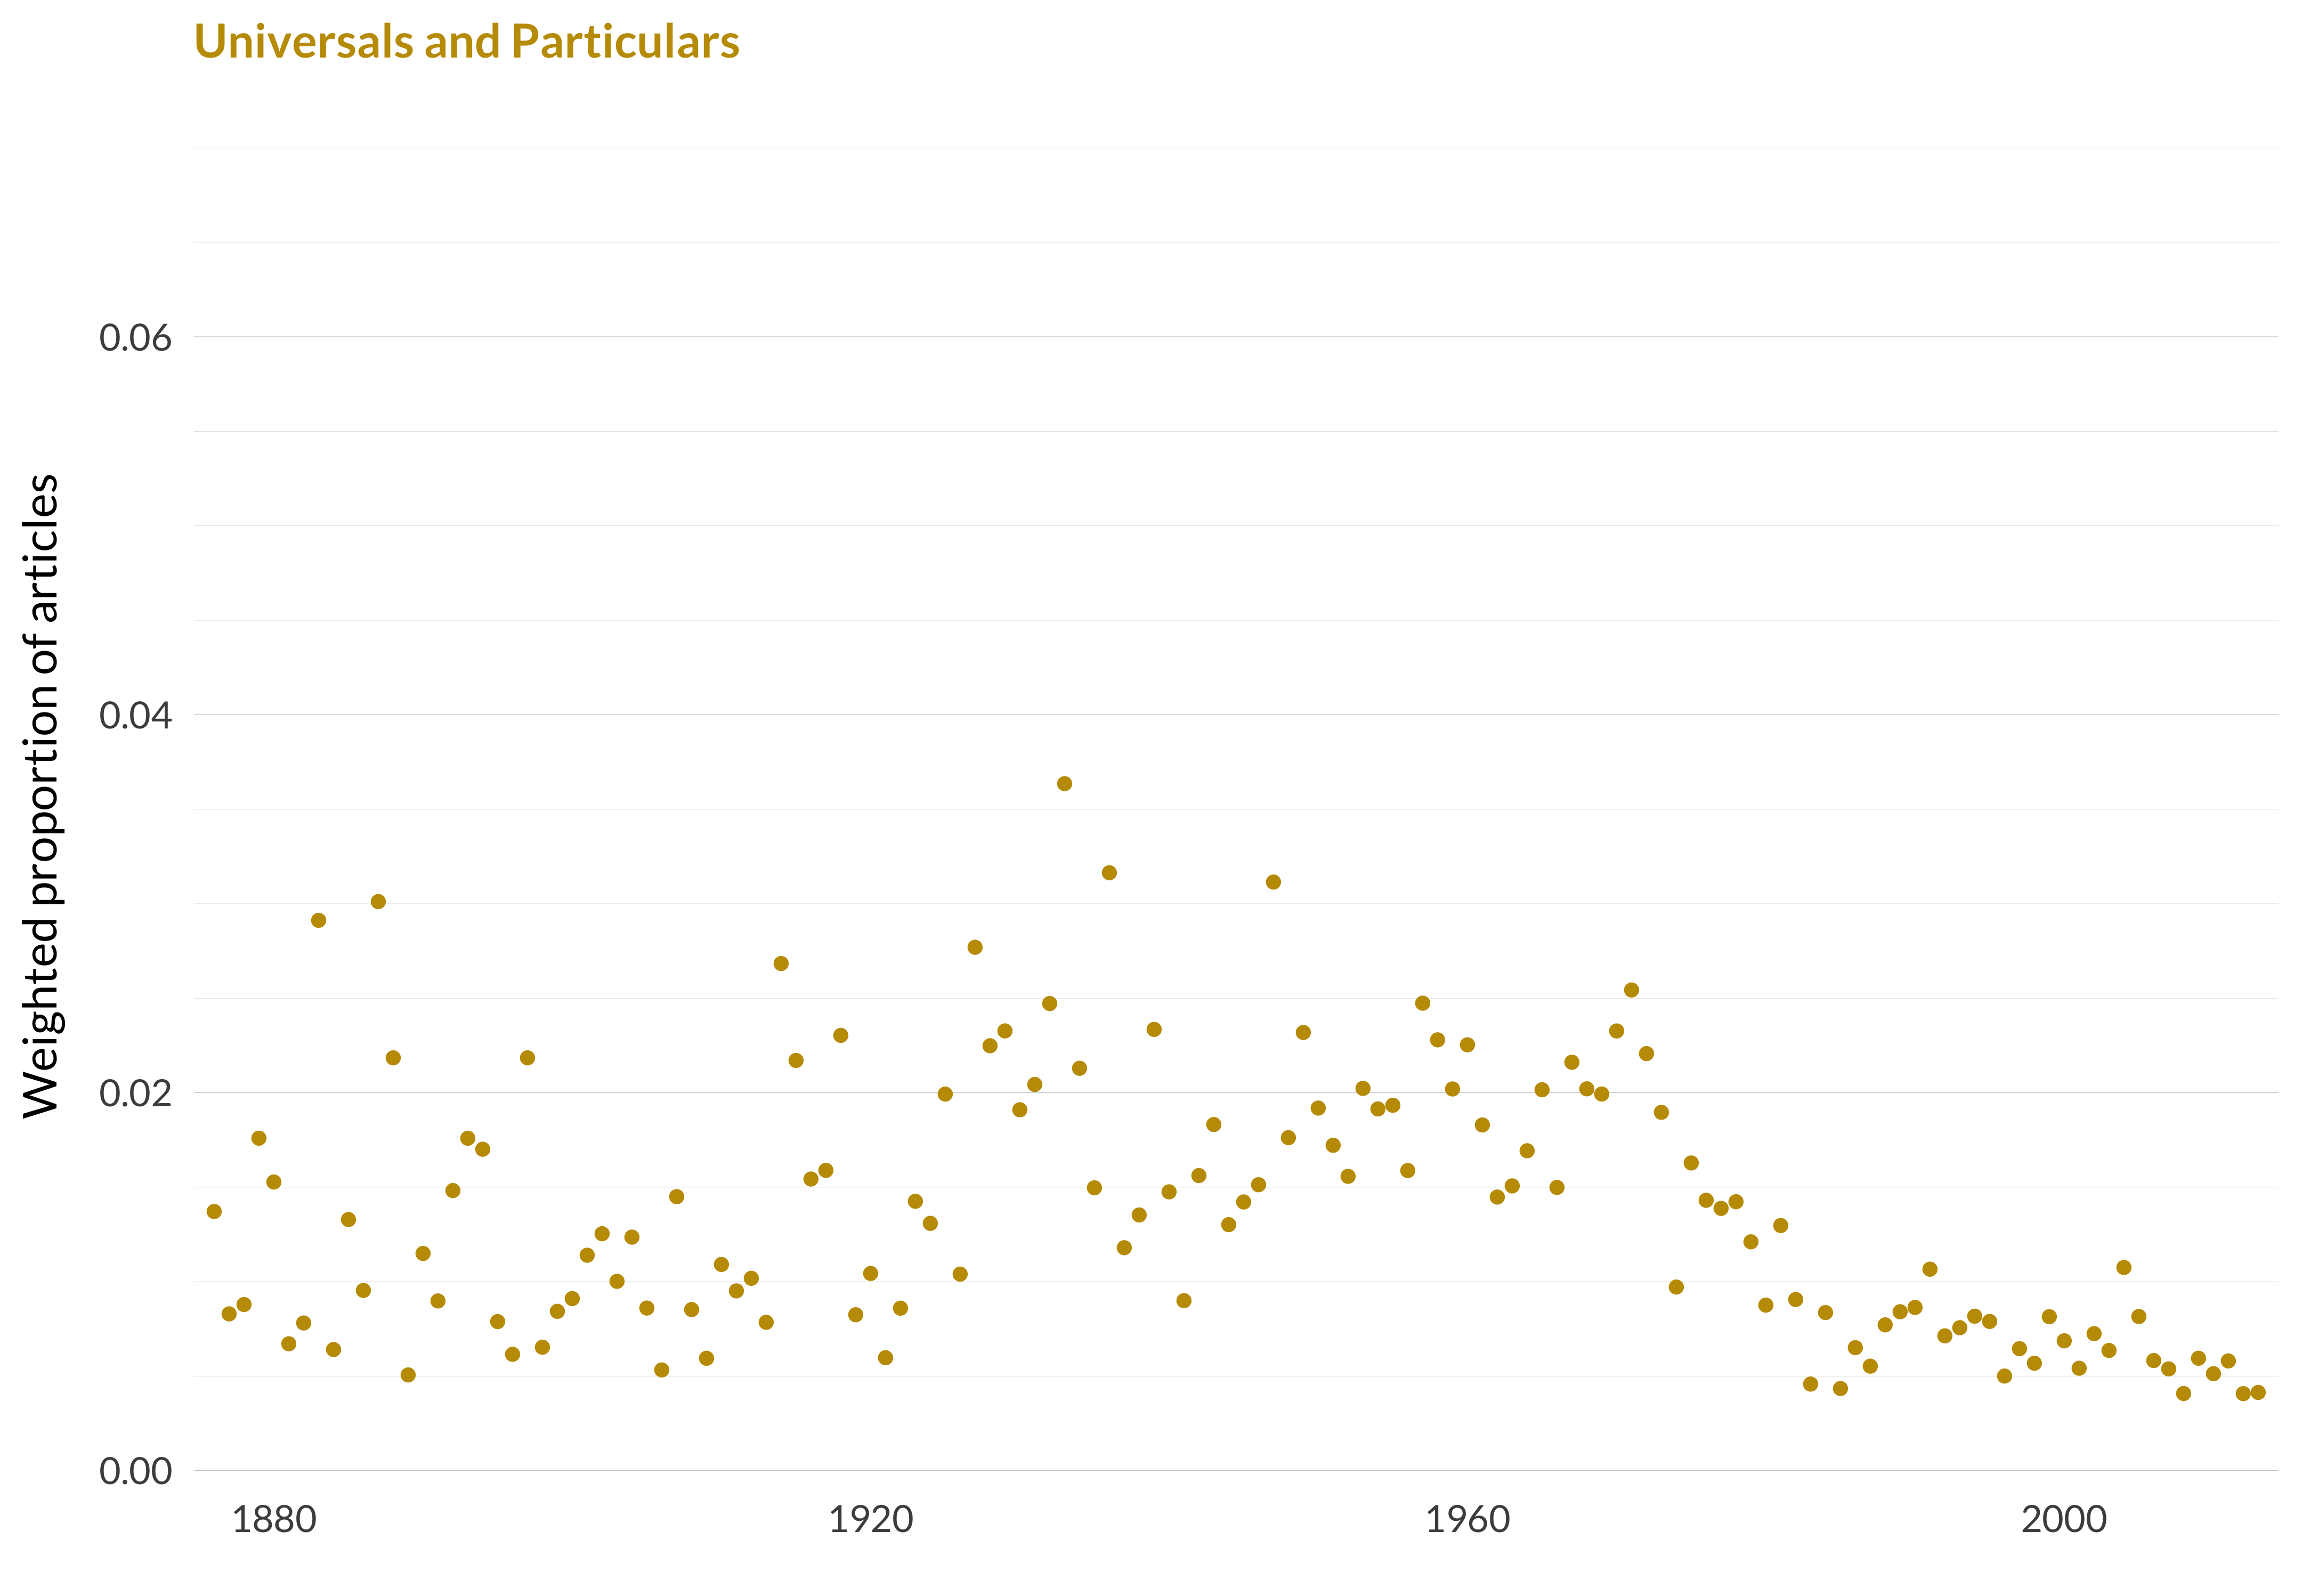 A scatterplot showing which proportion of articles each year are in the universals and particularstopic. The x-axis shows the year, the y-axis measures the proportion of articles each year in this topic. There is one dot per year. The highest value is in 1933 when 3.6% of articles were in this topic. The lowest value is in 2012 when 0.4% of articles were in this topic. The full table that provides the data for this graph is available in Table A.14 in Appendix A.